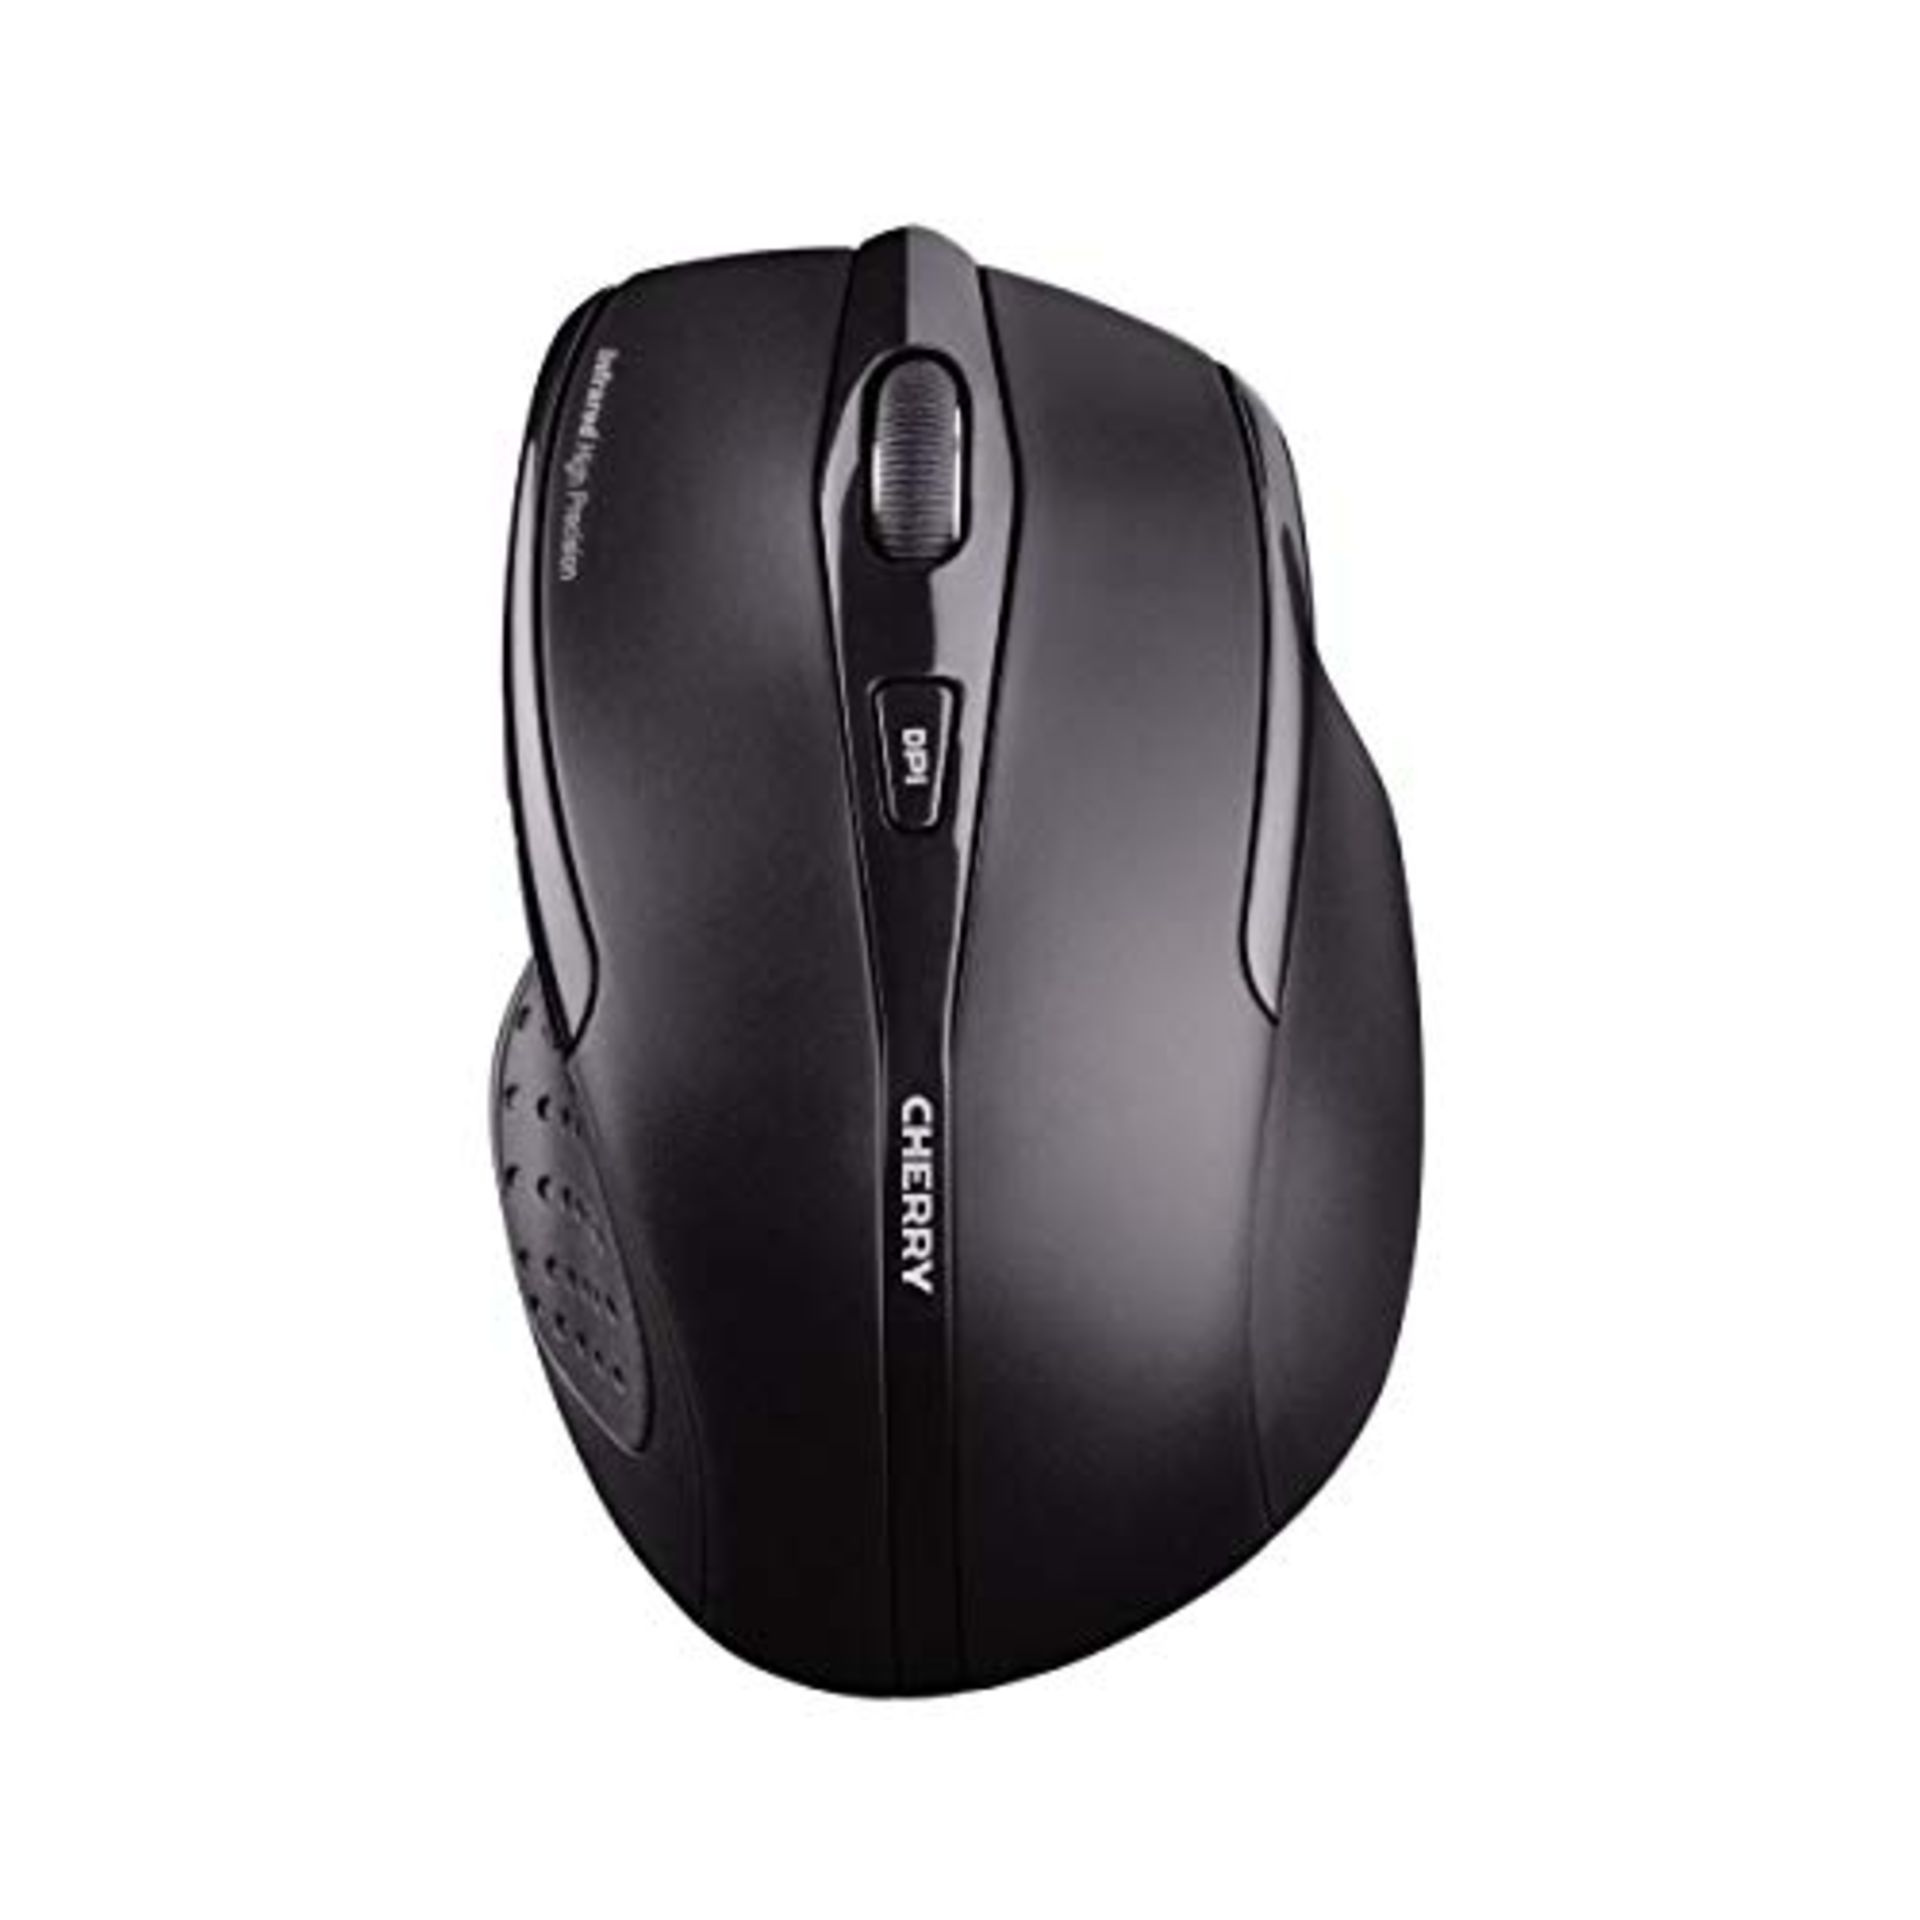 CHERRY MW 300 WIRELESS MOUSE - BLACK - Image 3 of 3